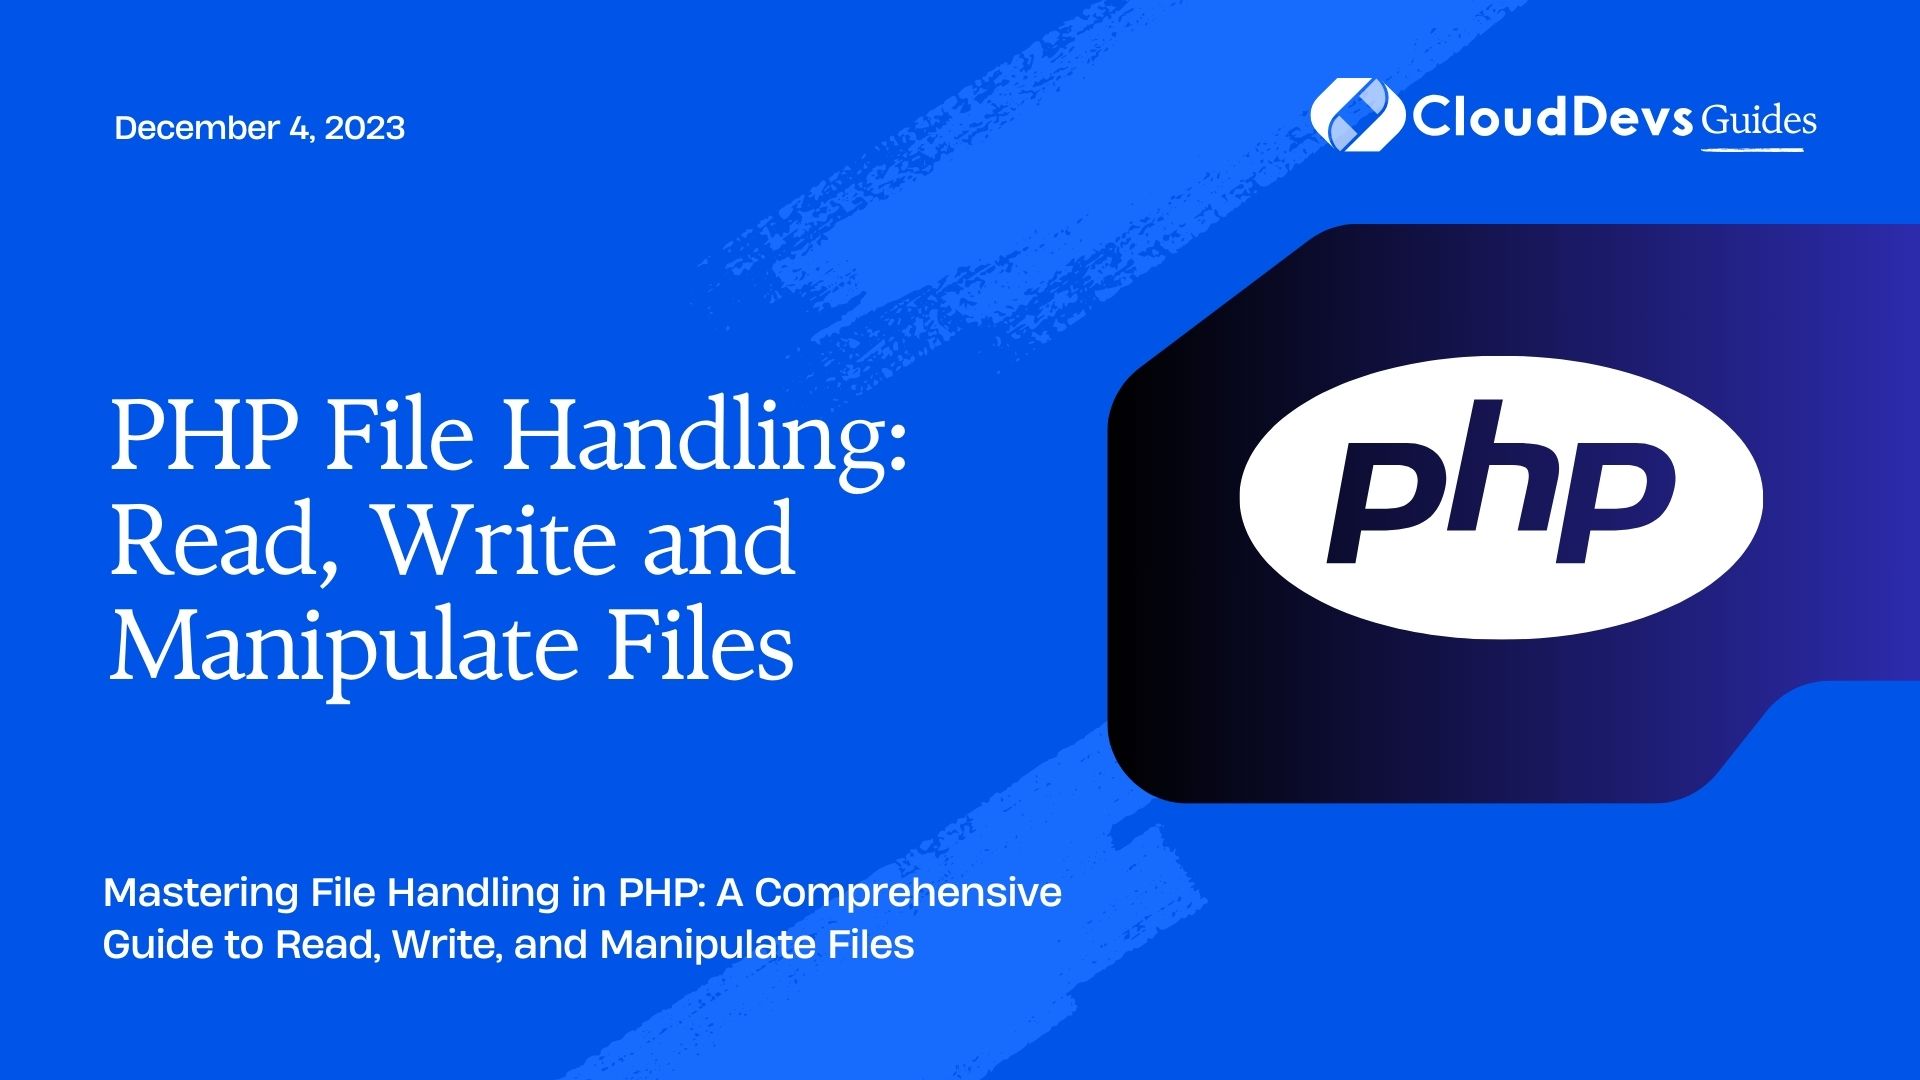 PHP File Handling: Read, Write and Manipulate Files